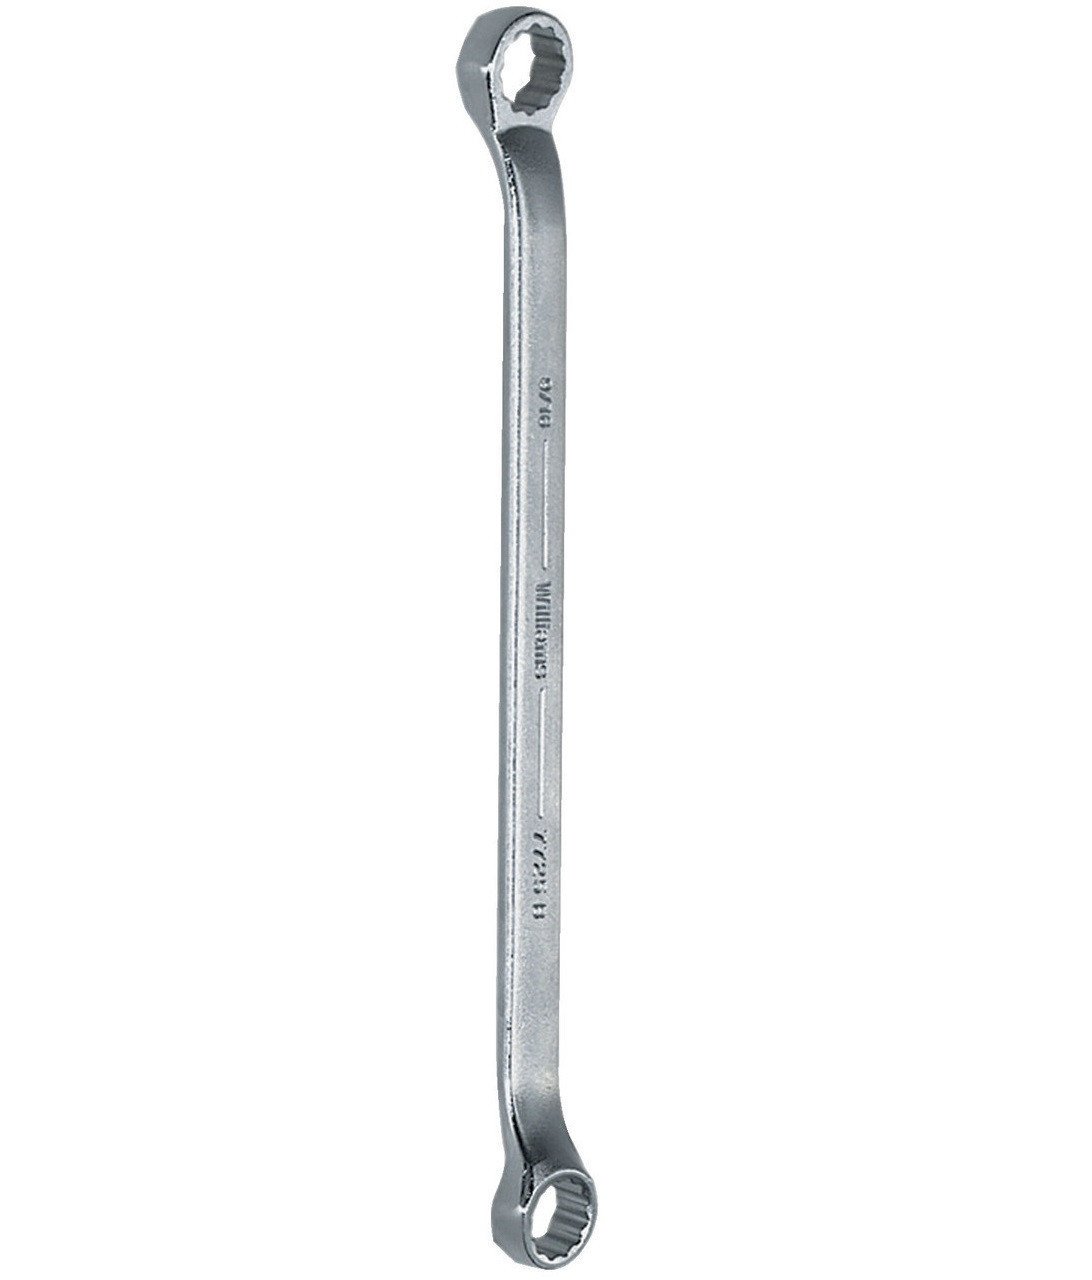 16x18MM Williams Satin Chrome Double Head 10 Degree Offset Box End Wrench 12 PT - JHWBWM-1618